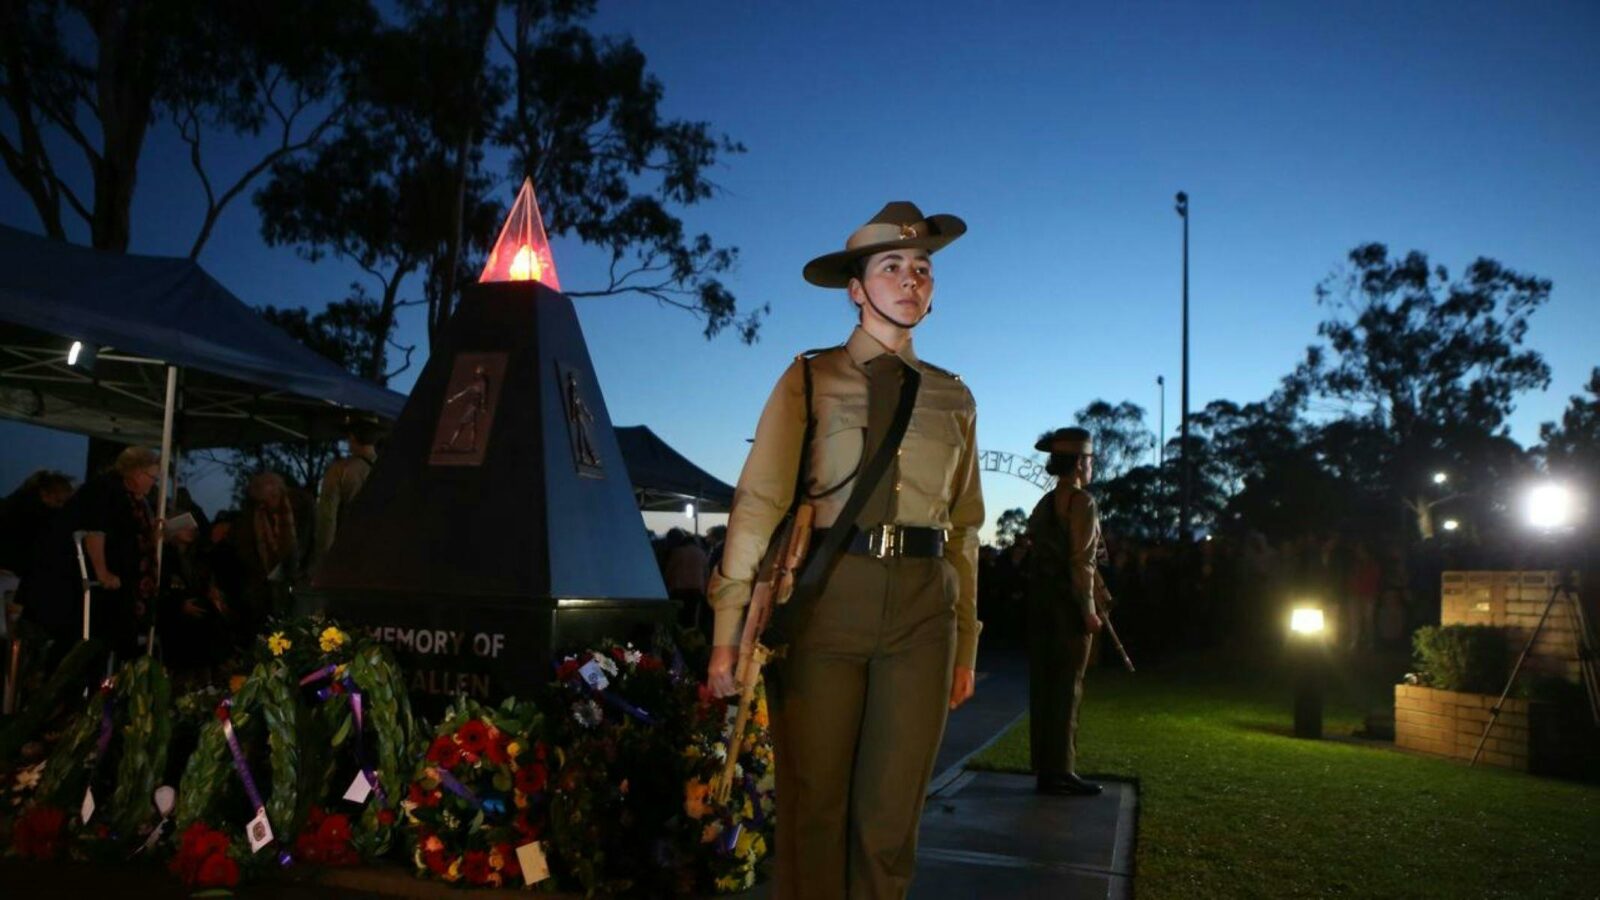 An image of a female soldier next to a cenotaph